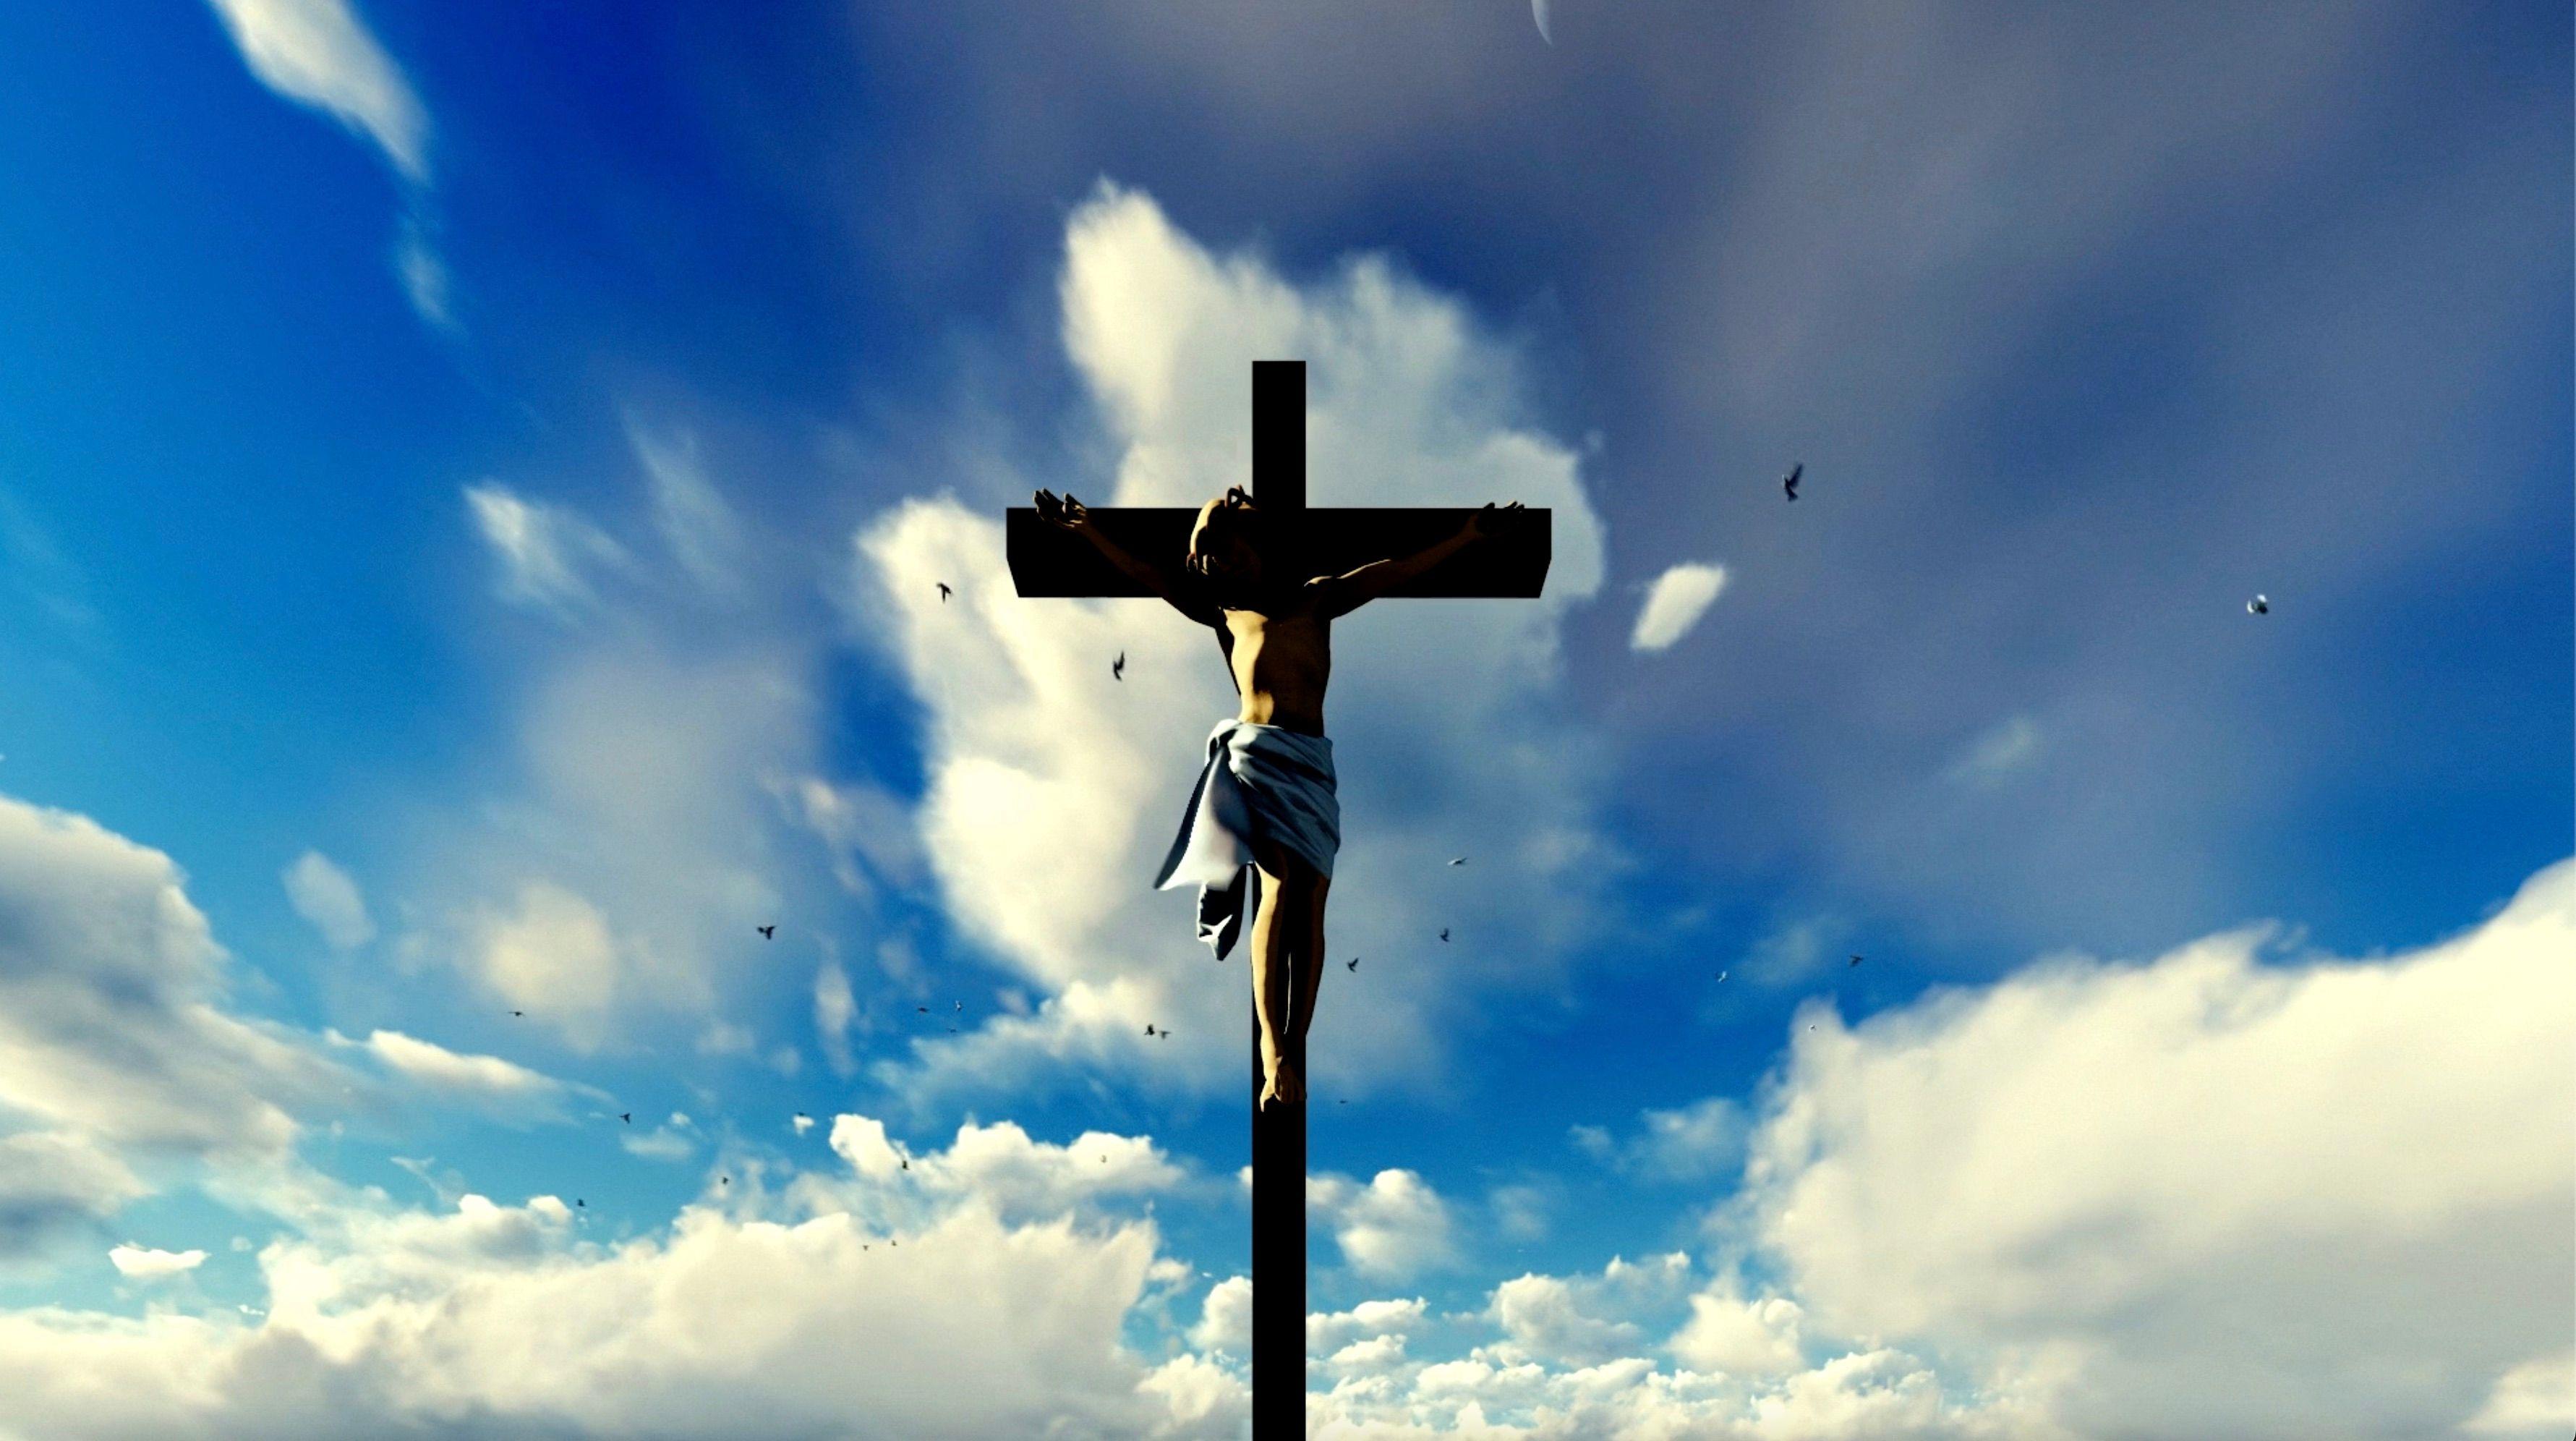 Jesus Christ nailed to the cross with clouds behind him